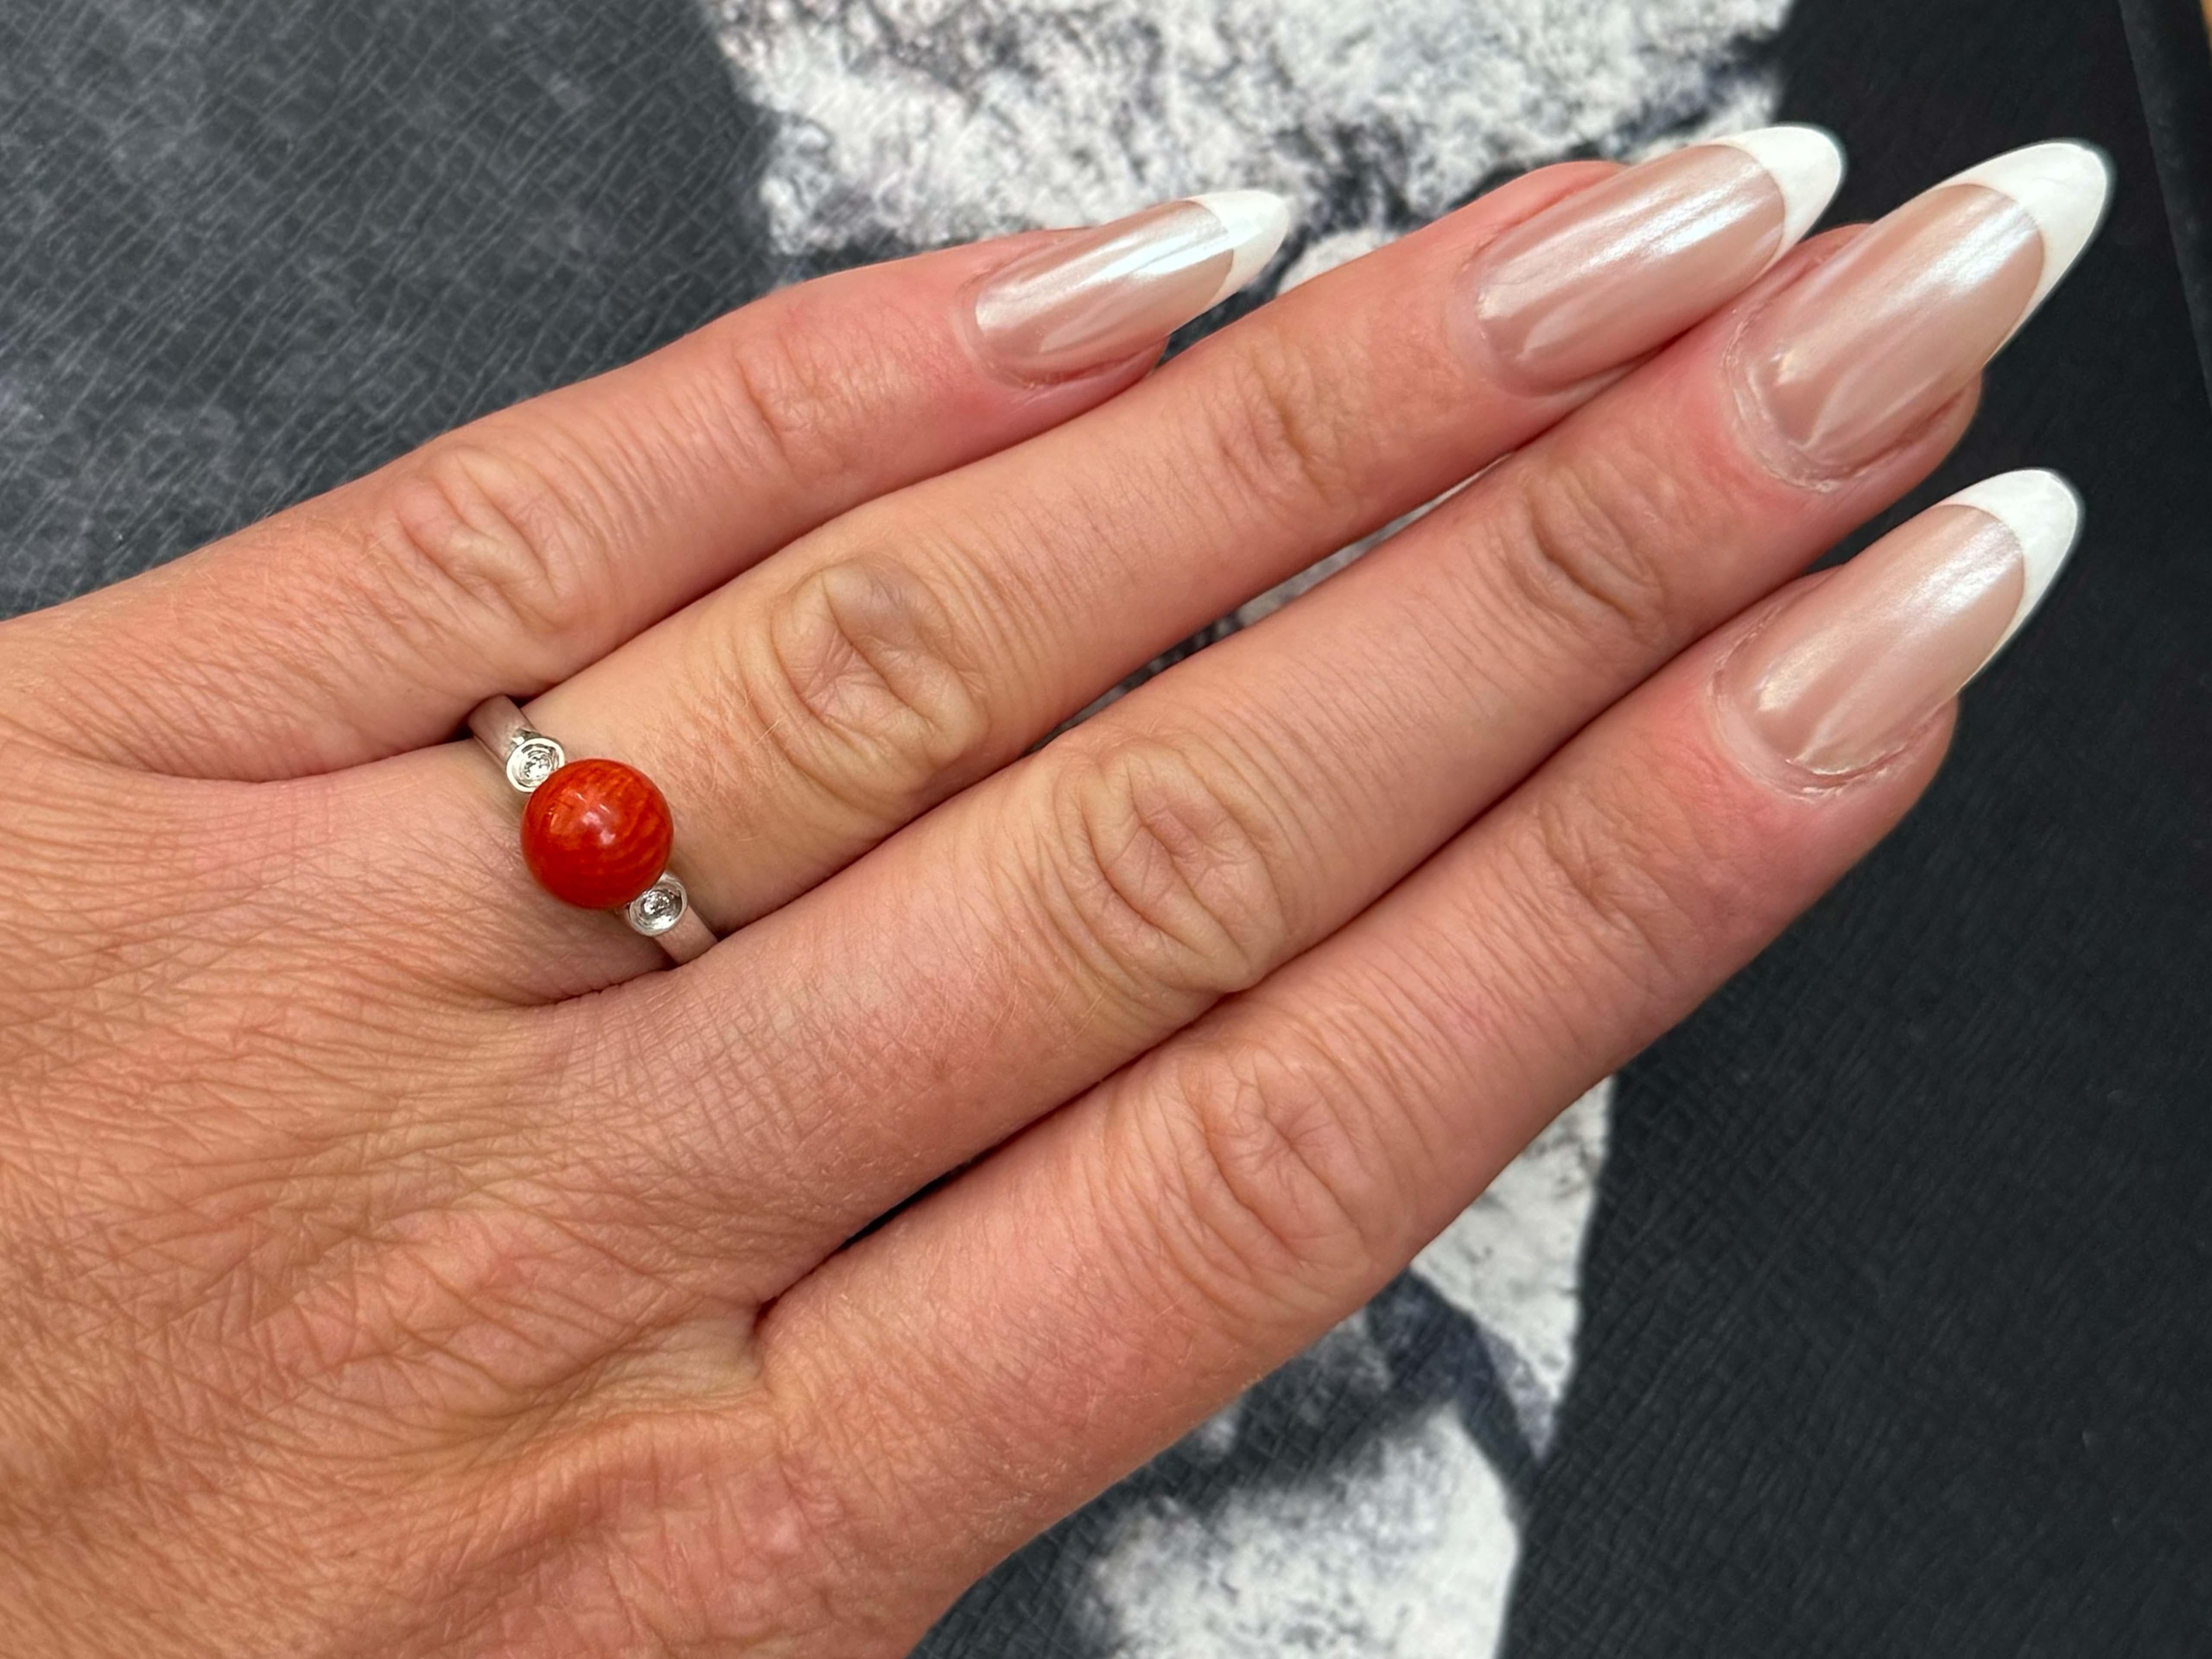 Item Specifications:

Metal: 14K White Gold

Ring Size: 6.5 (resizing available for a fee)

Total Weight: 2.9 Grams

Ring Height: 21 mm

Aka Coral Specifications:

Shape: Sphere

Coral Diameter: 8 mm

Diamond Count: 2 round brilliant cut 

Diamond